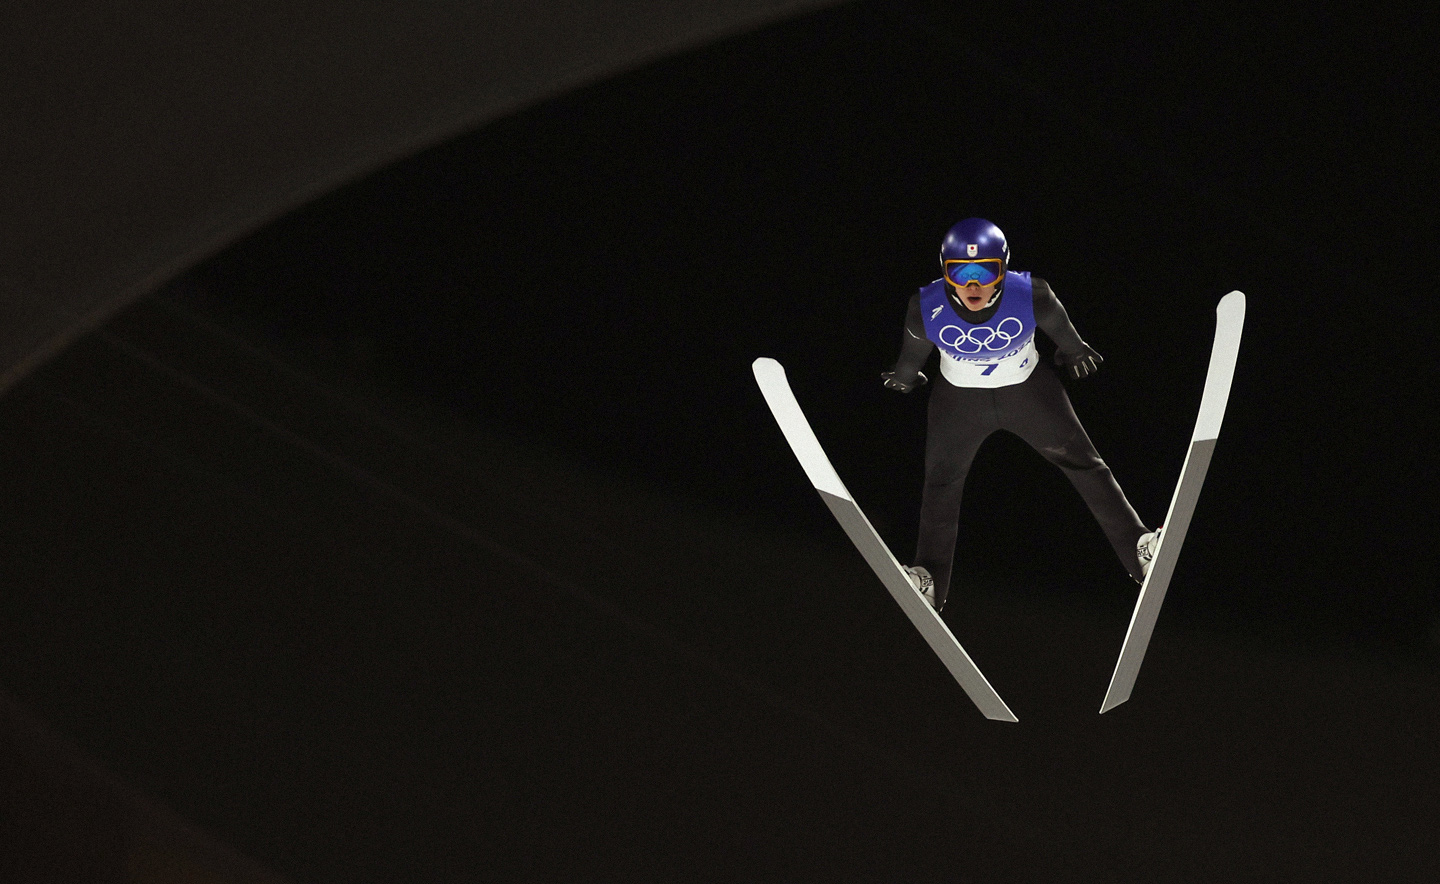 Ryoyu Kobayashi of Team Japan competes during Men's Ski jumping Trial Round For Competition on Day 10 of Beijing 2022 Winter Olympics at National Ski Jumping Centre on February 14, 2022 in Zhangjiakou, China.